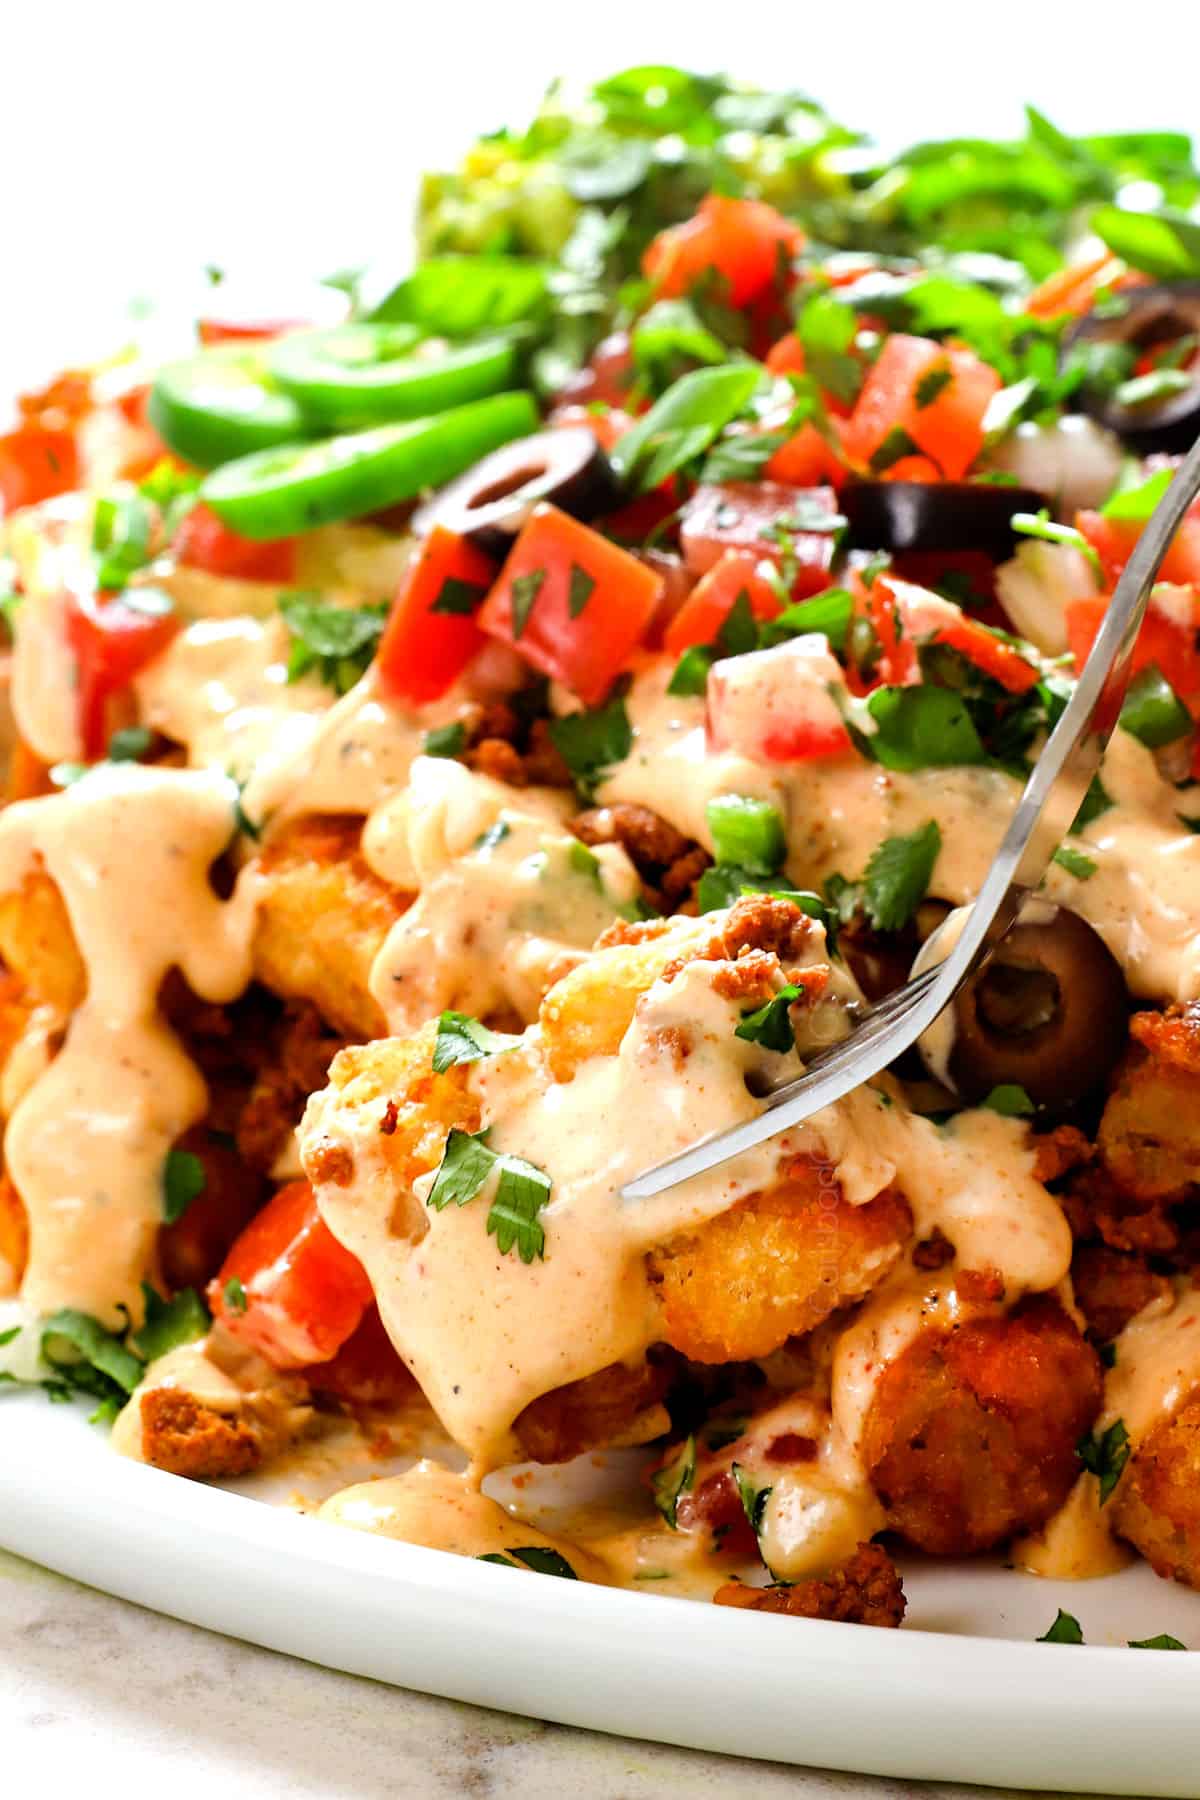 showing how to eat tater tot nachos (totchos) by eating the tater tots with a fork